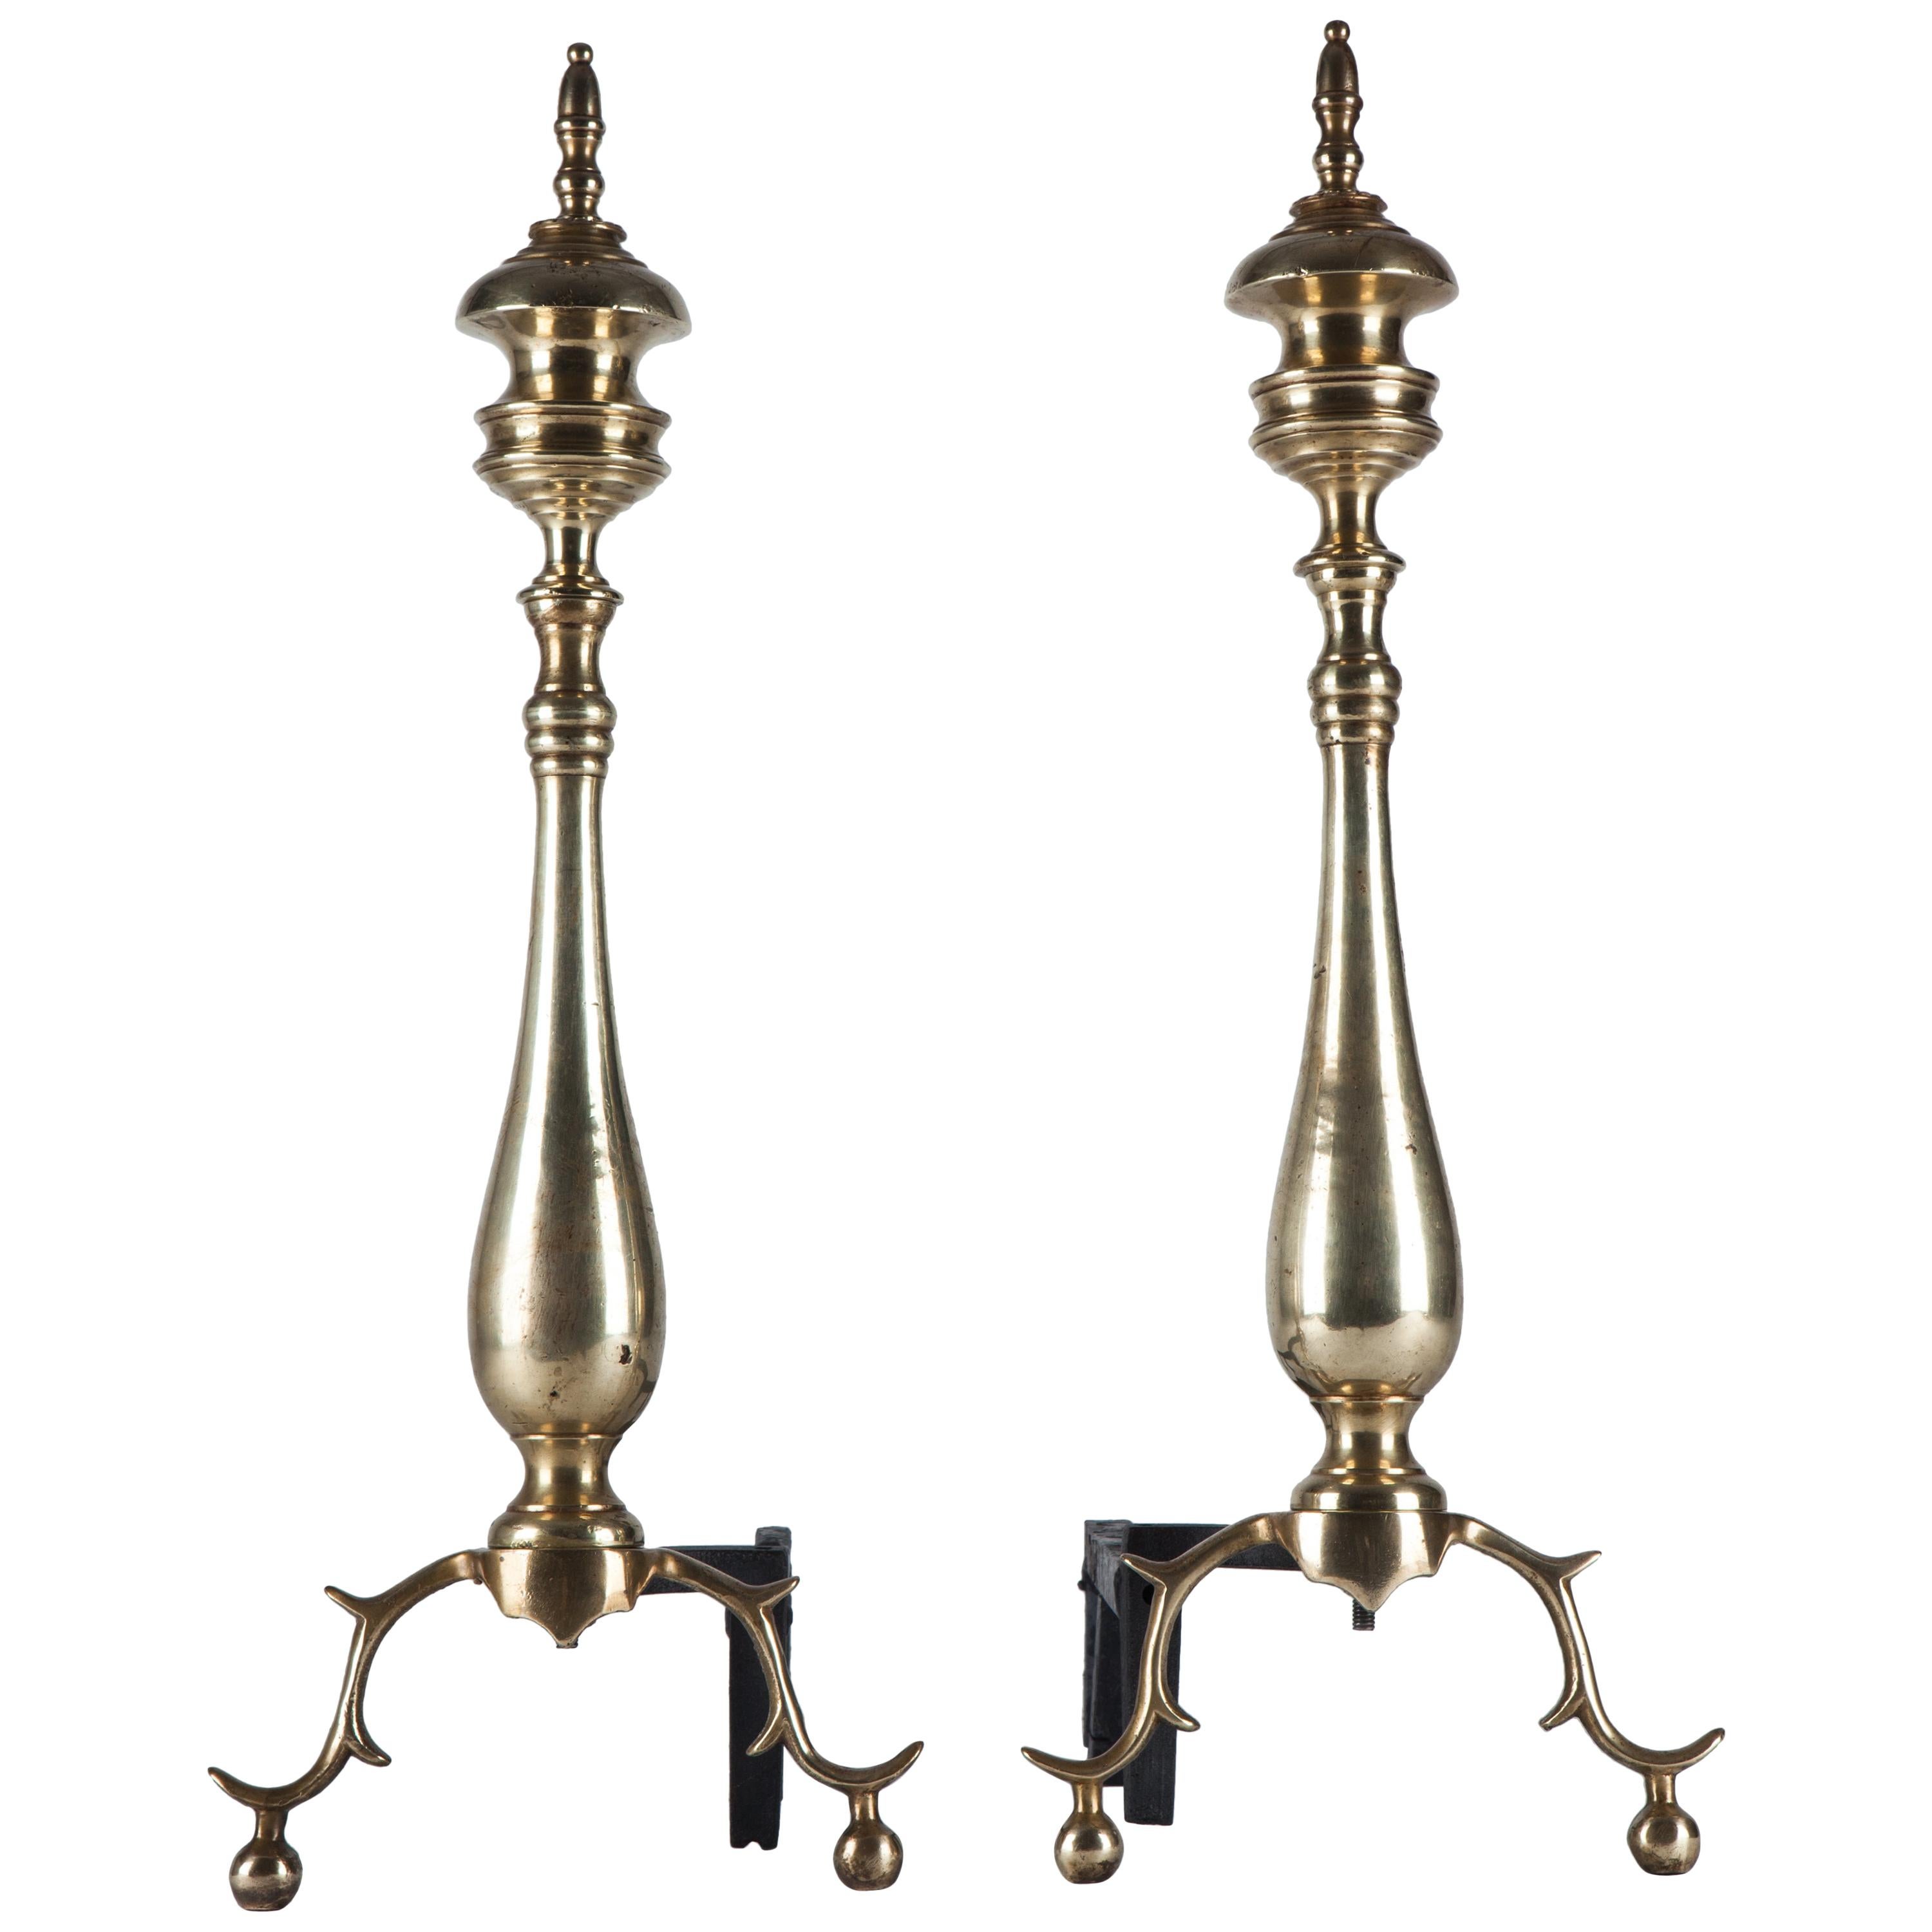 Antique Pair of Brass Baluster Turned Andirons with Cast Legs, circa 1920